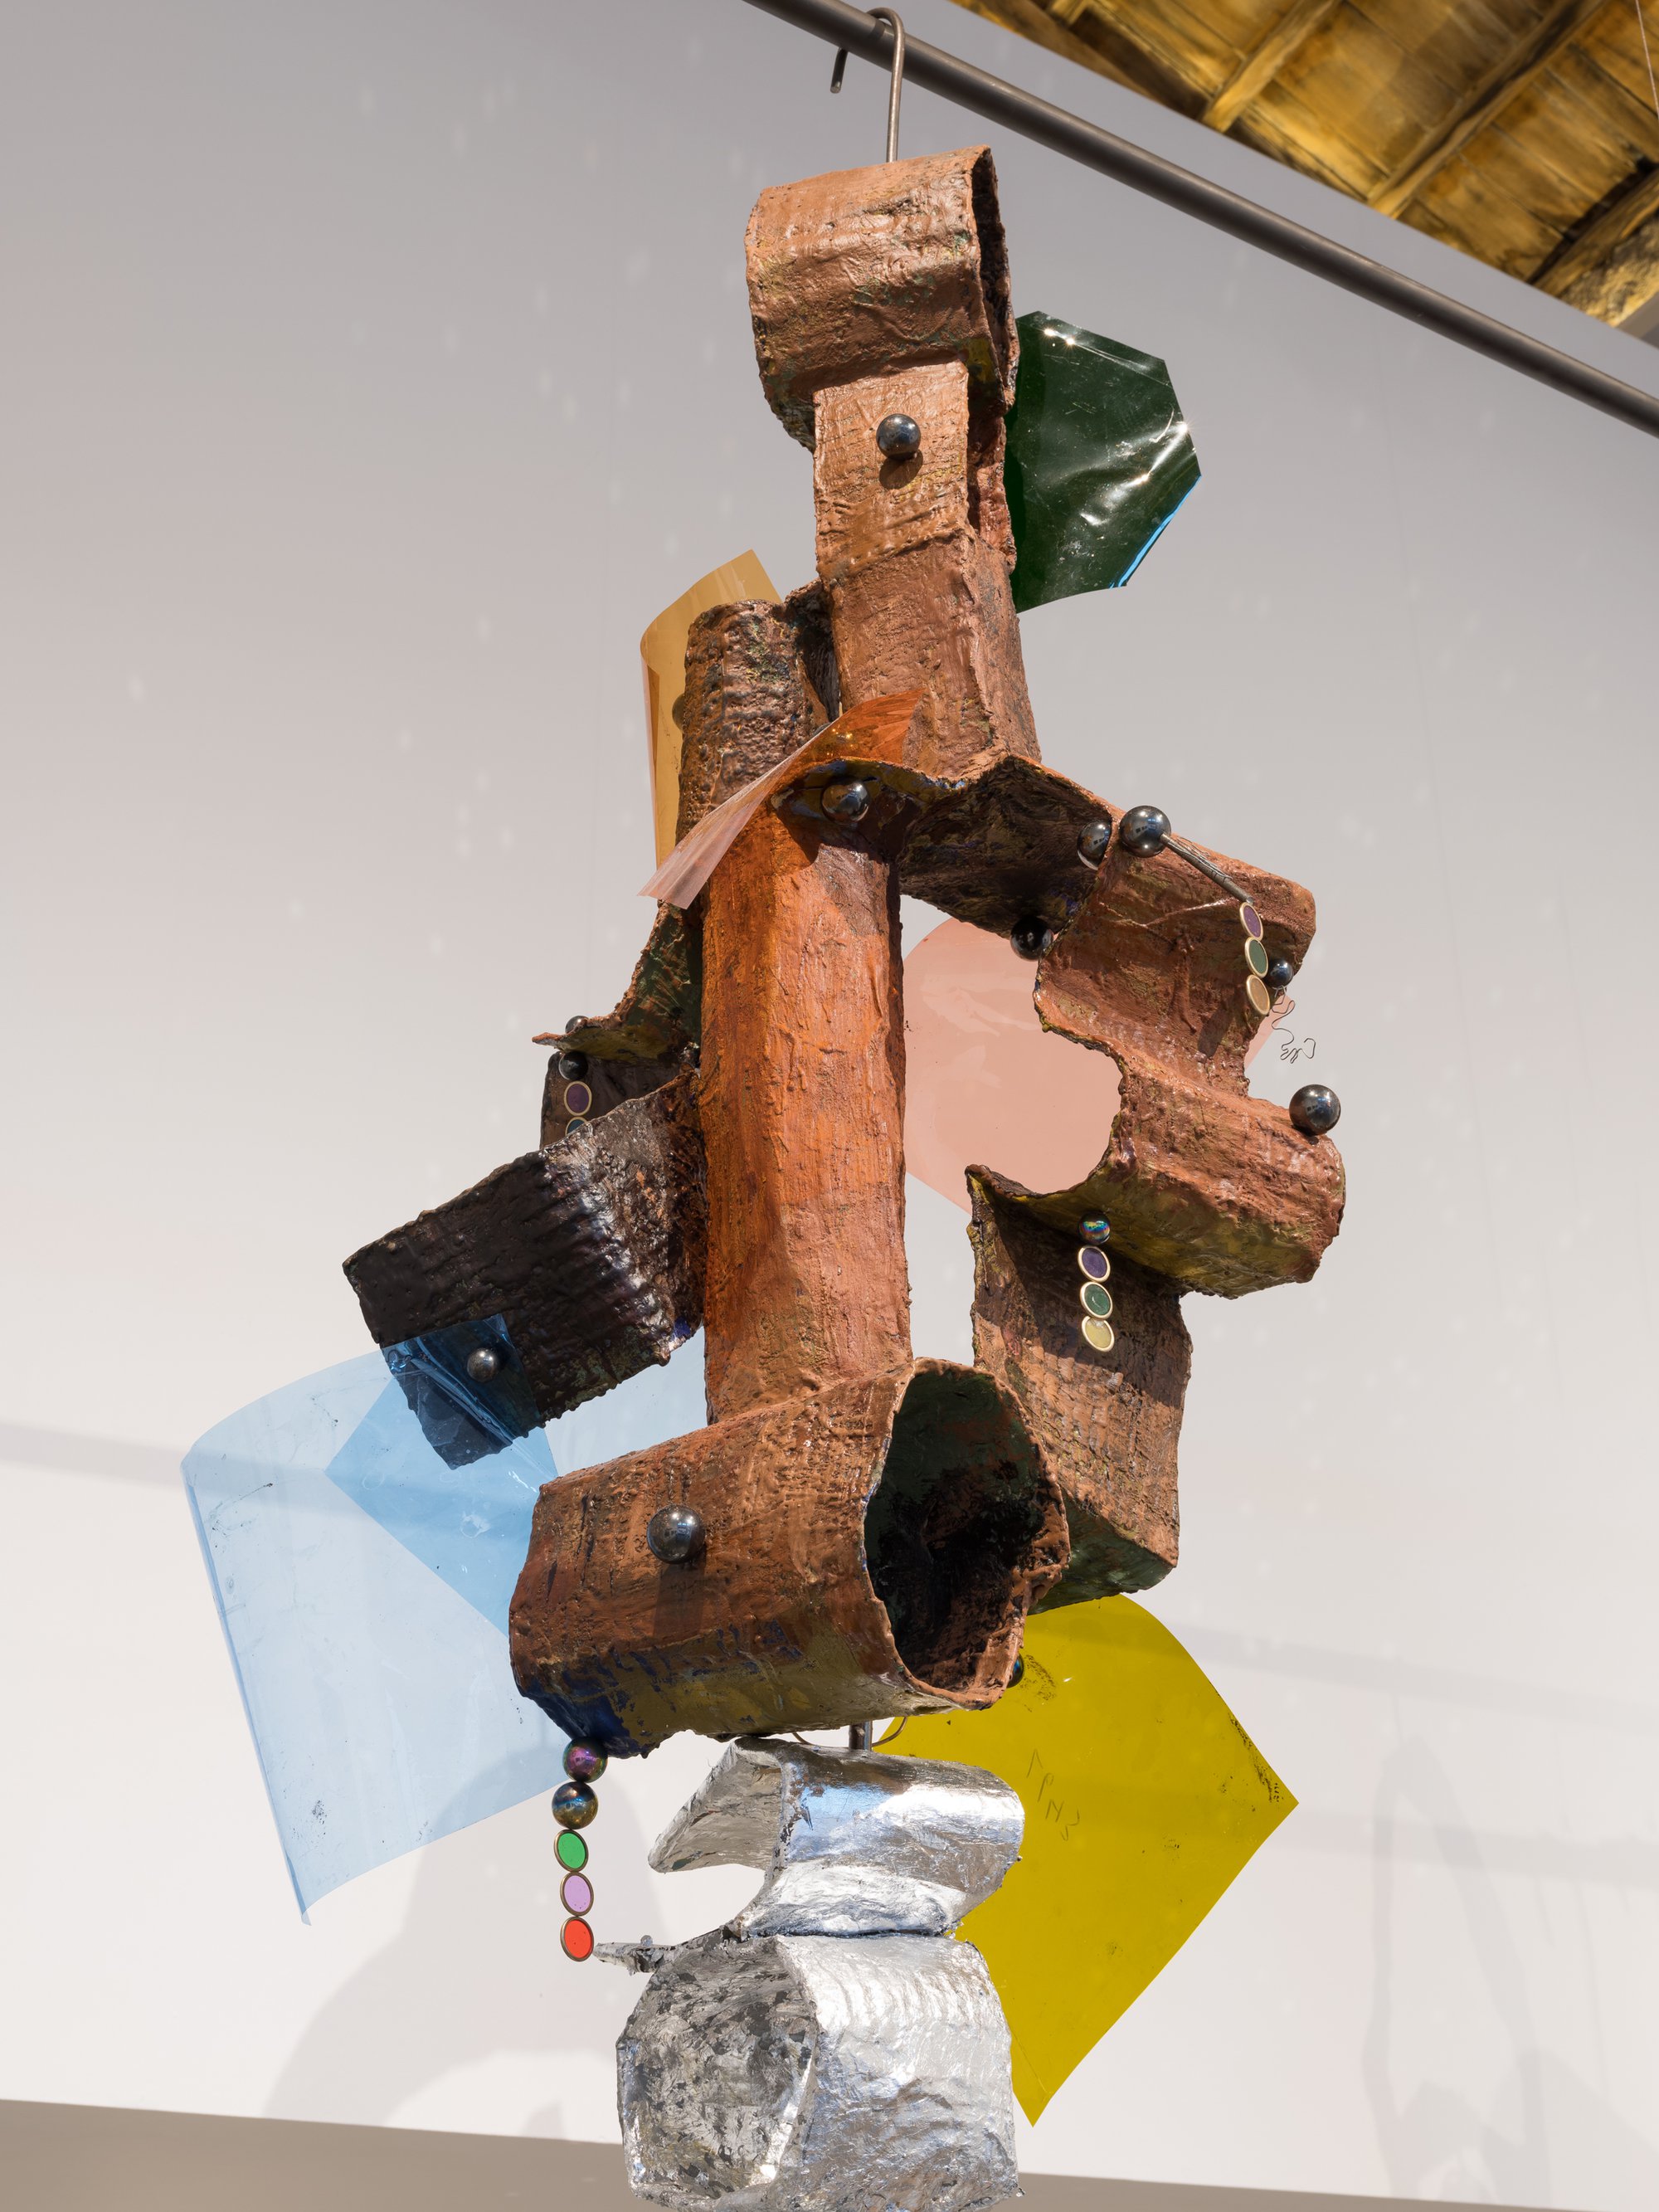 Tamara Henderson, The Canberran Characters, detail, produced in collaboration with Nell Pearson, various material, dimensions variable, 2020-2021